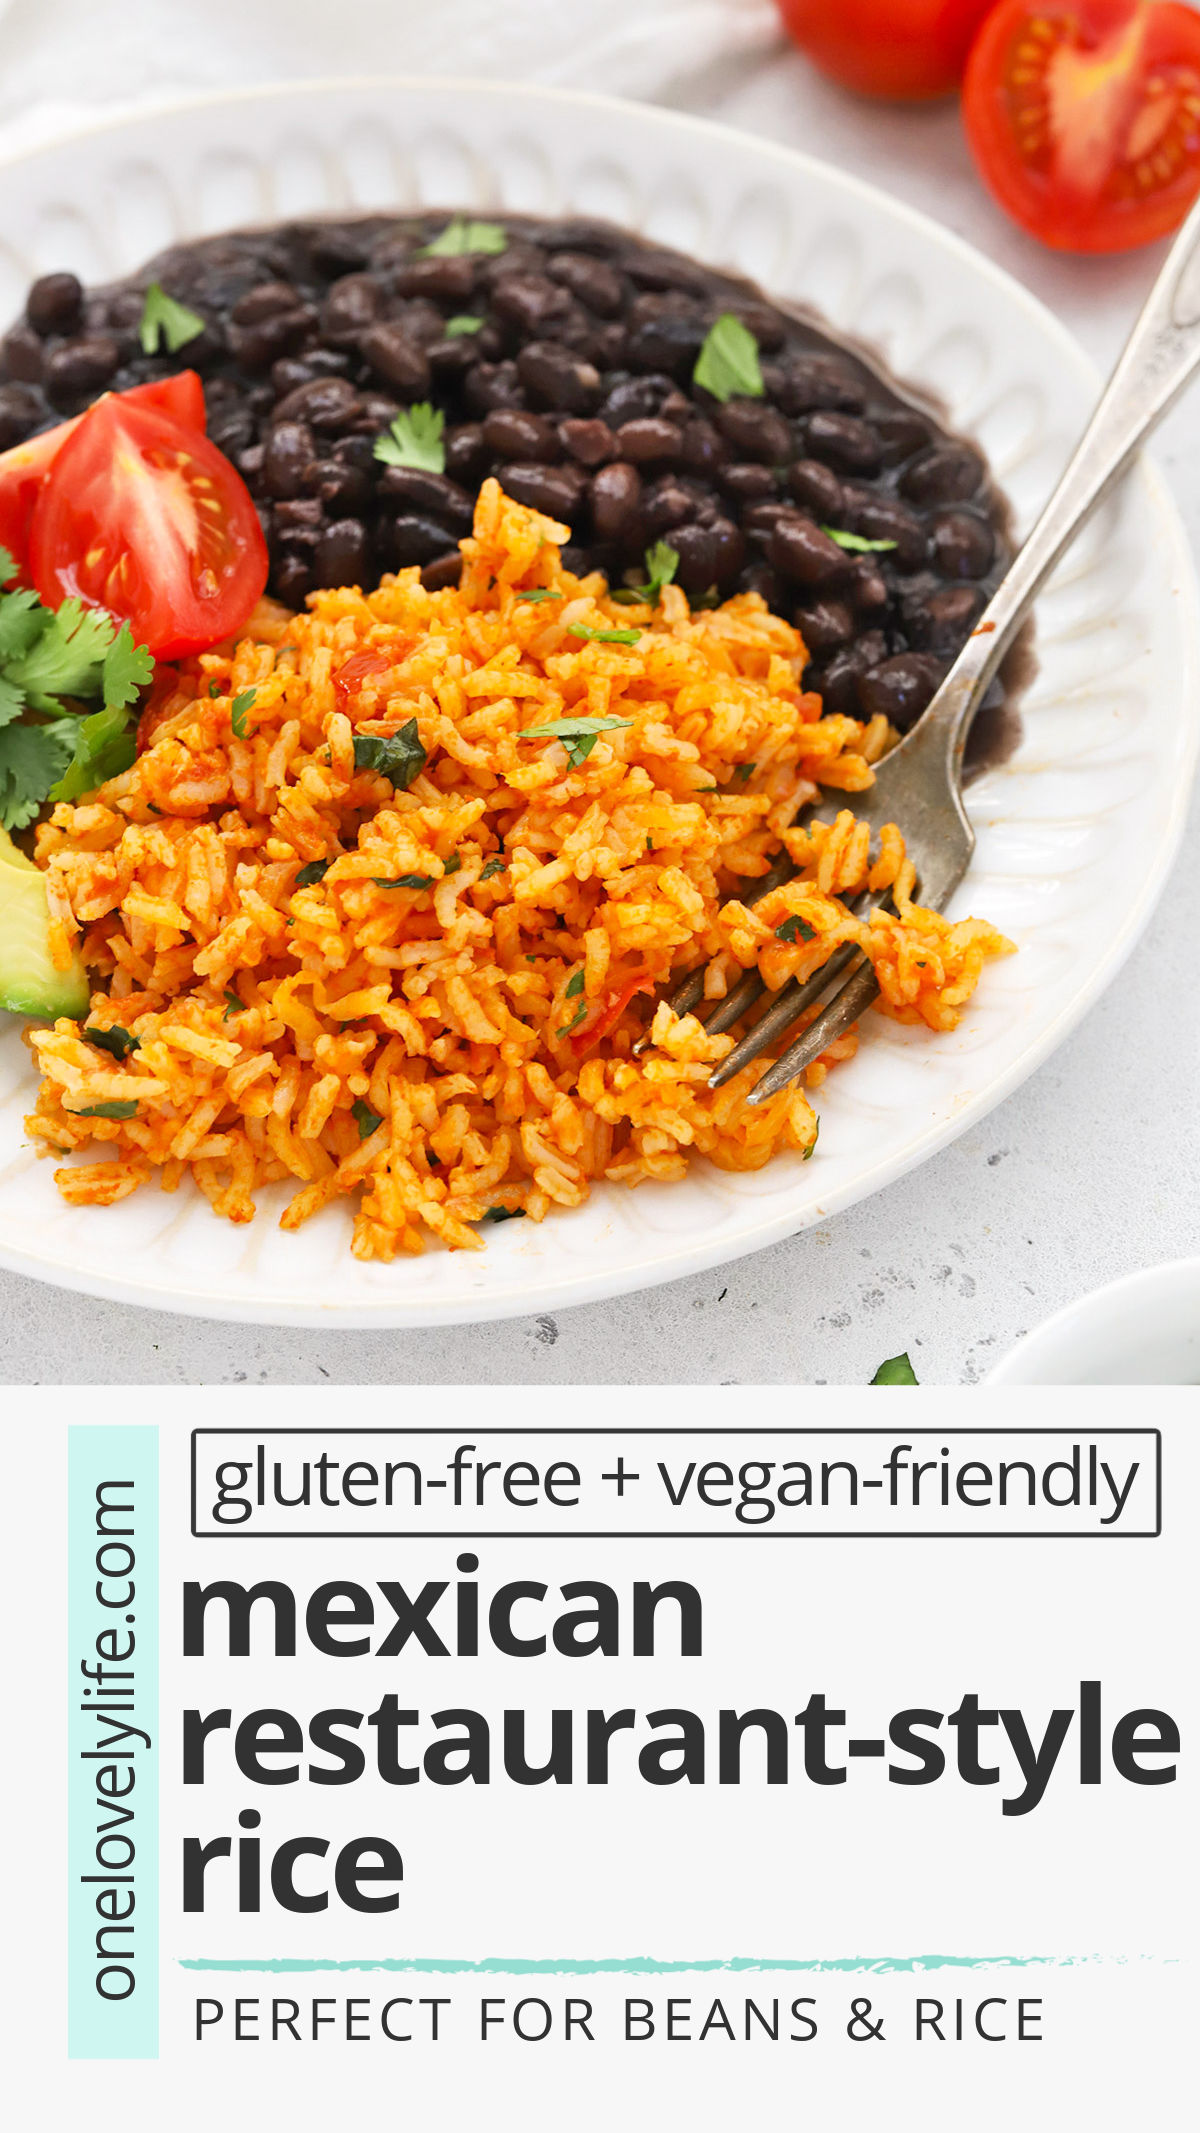 Mexican Restaurant Rice - Make your own Mexican rice at home, just like your favorite restaurant rice. Serve with beans as a side, use for burrito bowls & more! // Vegetarian Mexican Rice // Mexican Style Rice // Restaurant Mexican Rice // Red Rice // Mexican Red Rice #sidedish #texmex #mexicanrice #glutenfree